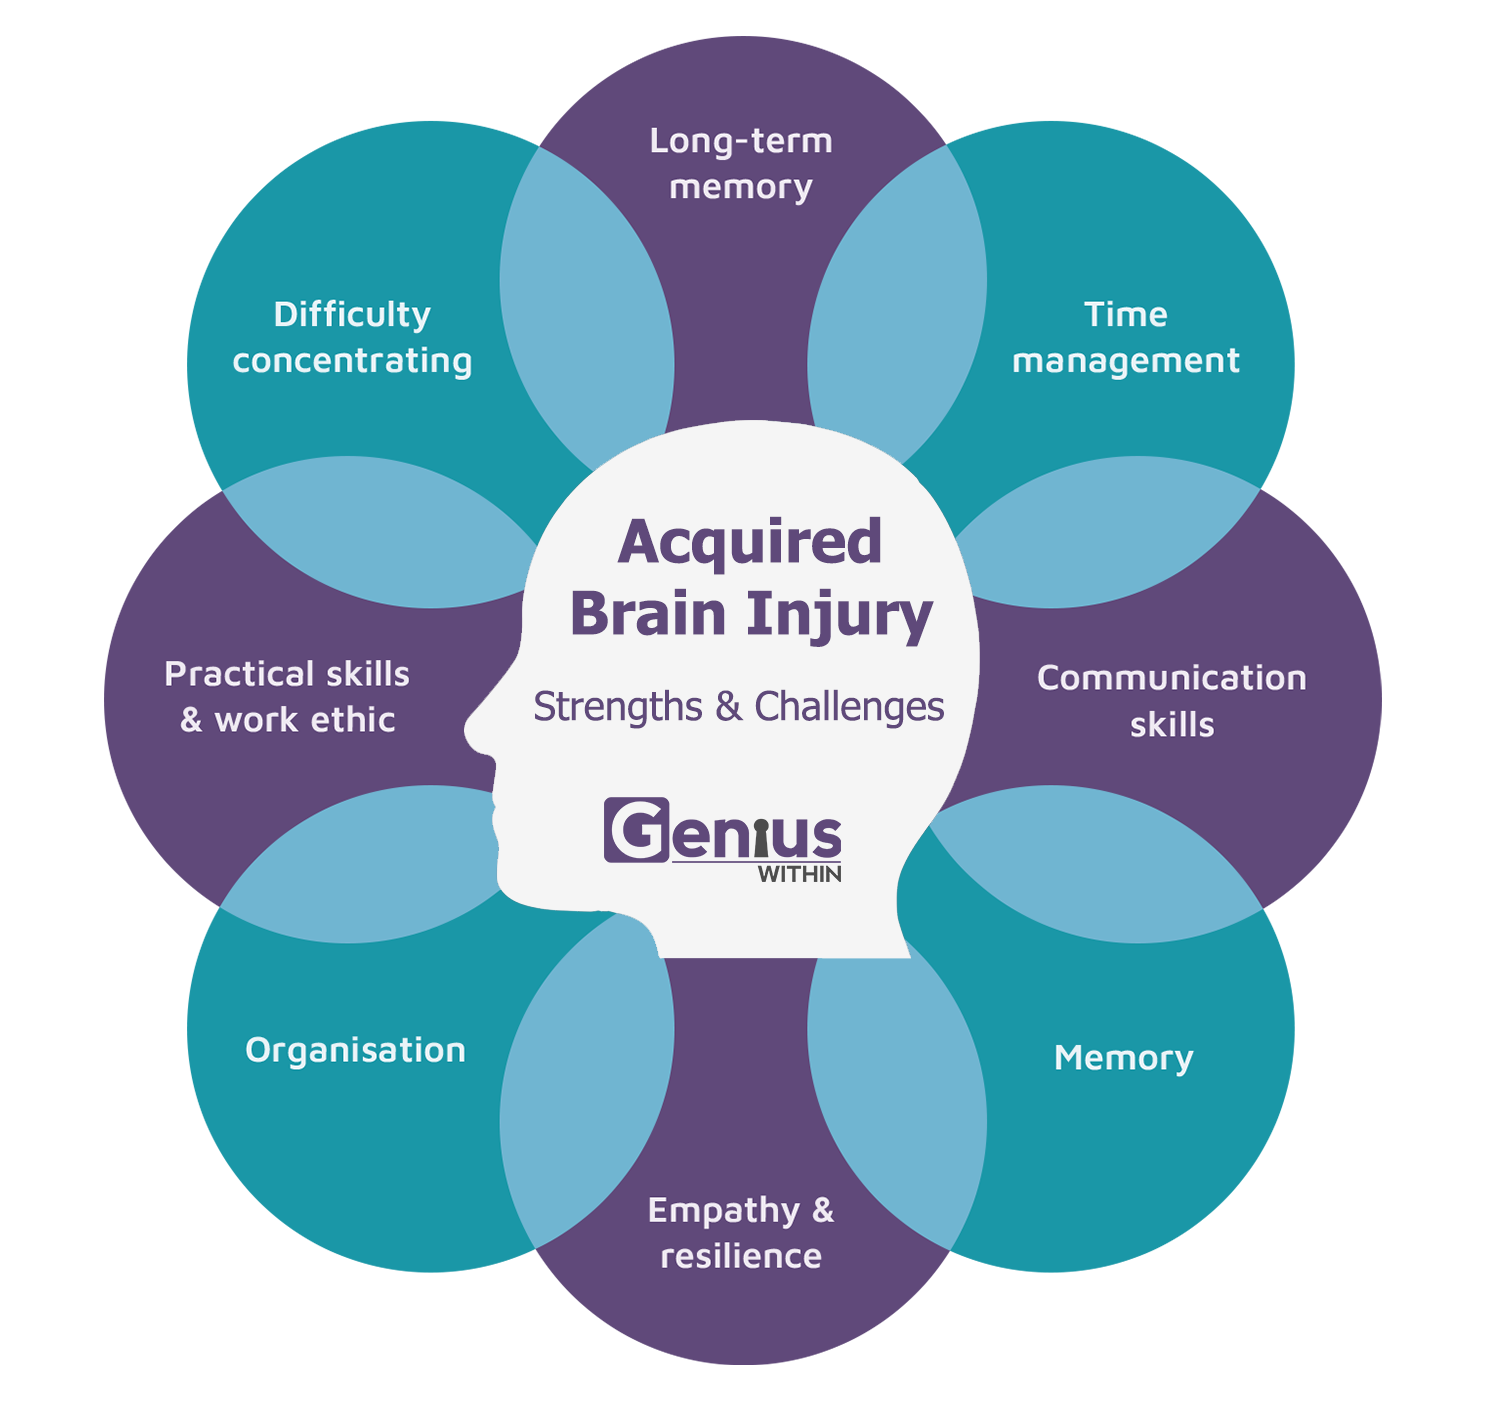 Info graphic with head at the centre and overlapping text bubbles in a circle around it. Title reads: Acquired Brain injury, strengths and challenges. The strengths and challenges are listed as follows; long-term memory, time management, communication skills, memory, empathy and resilience, organisation, practical skills and work ethic, difficulty concentrating.